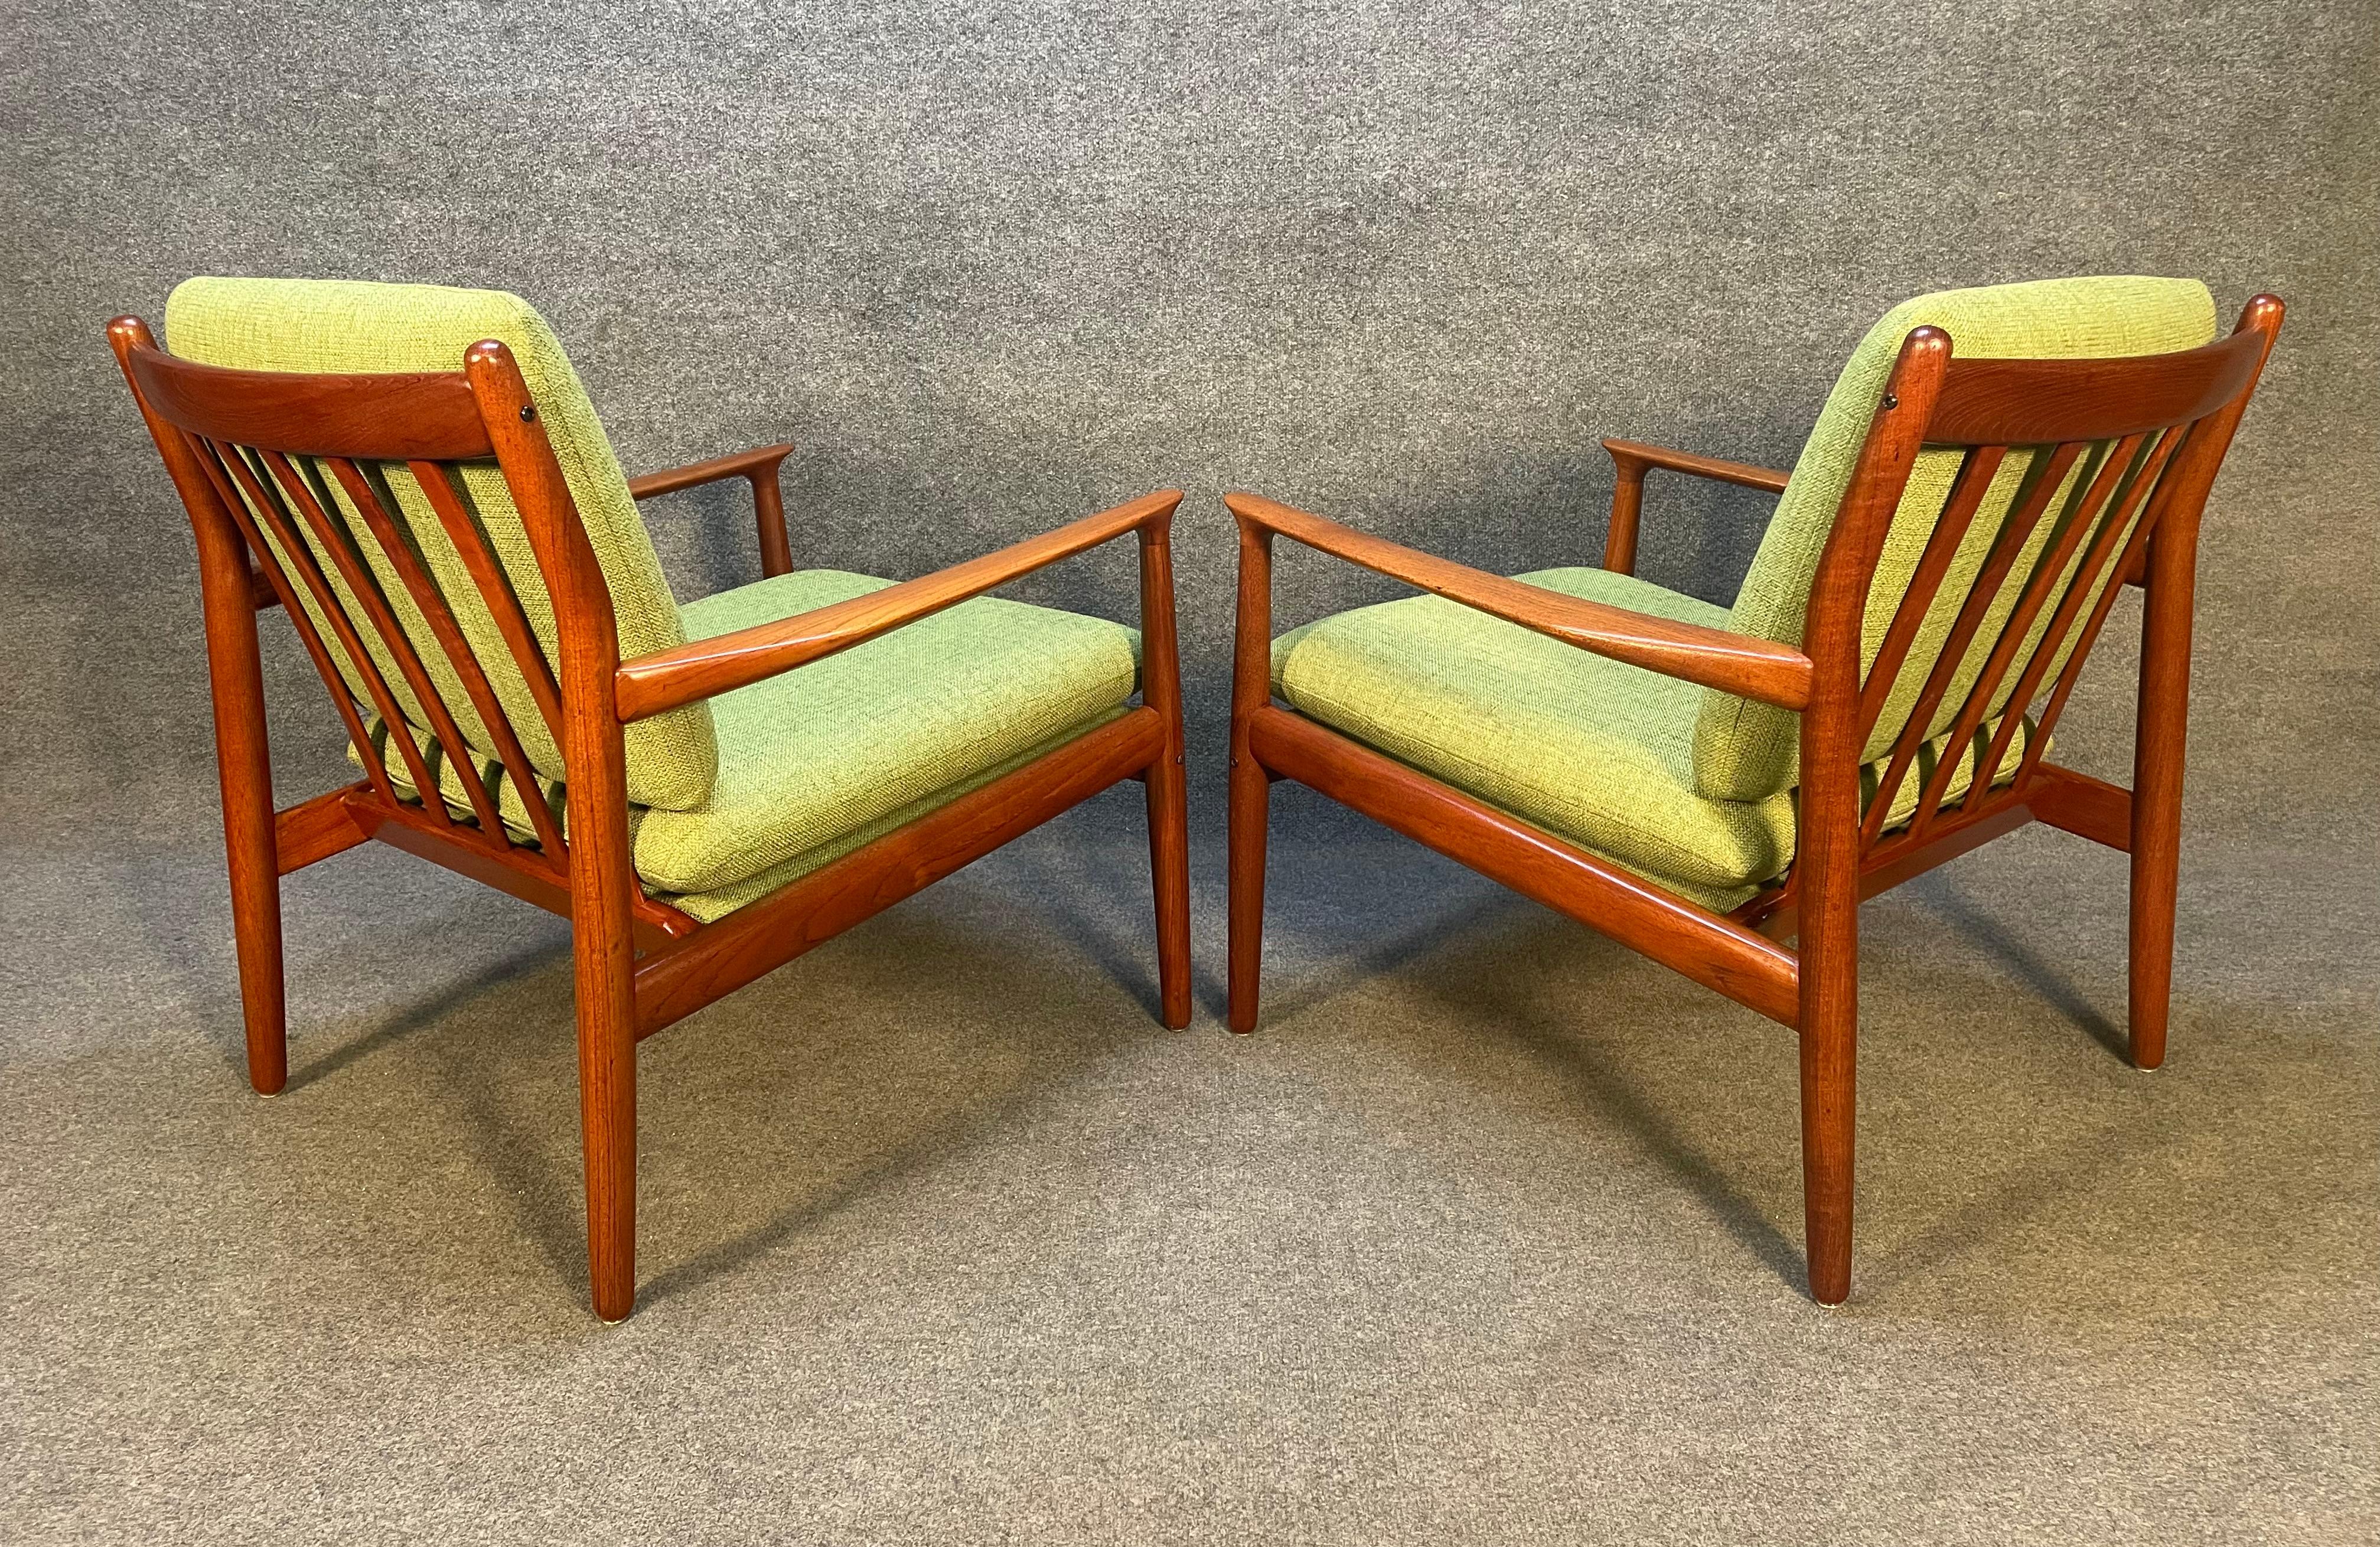 Mid-20th Century Pair of Vintage Danish Mid Century Teak Lounge Chairs by Svend Aage Eriksen For Sale